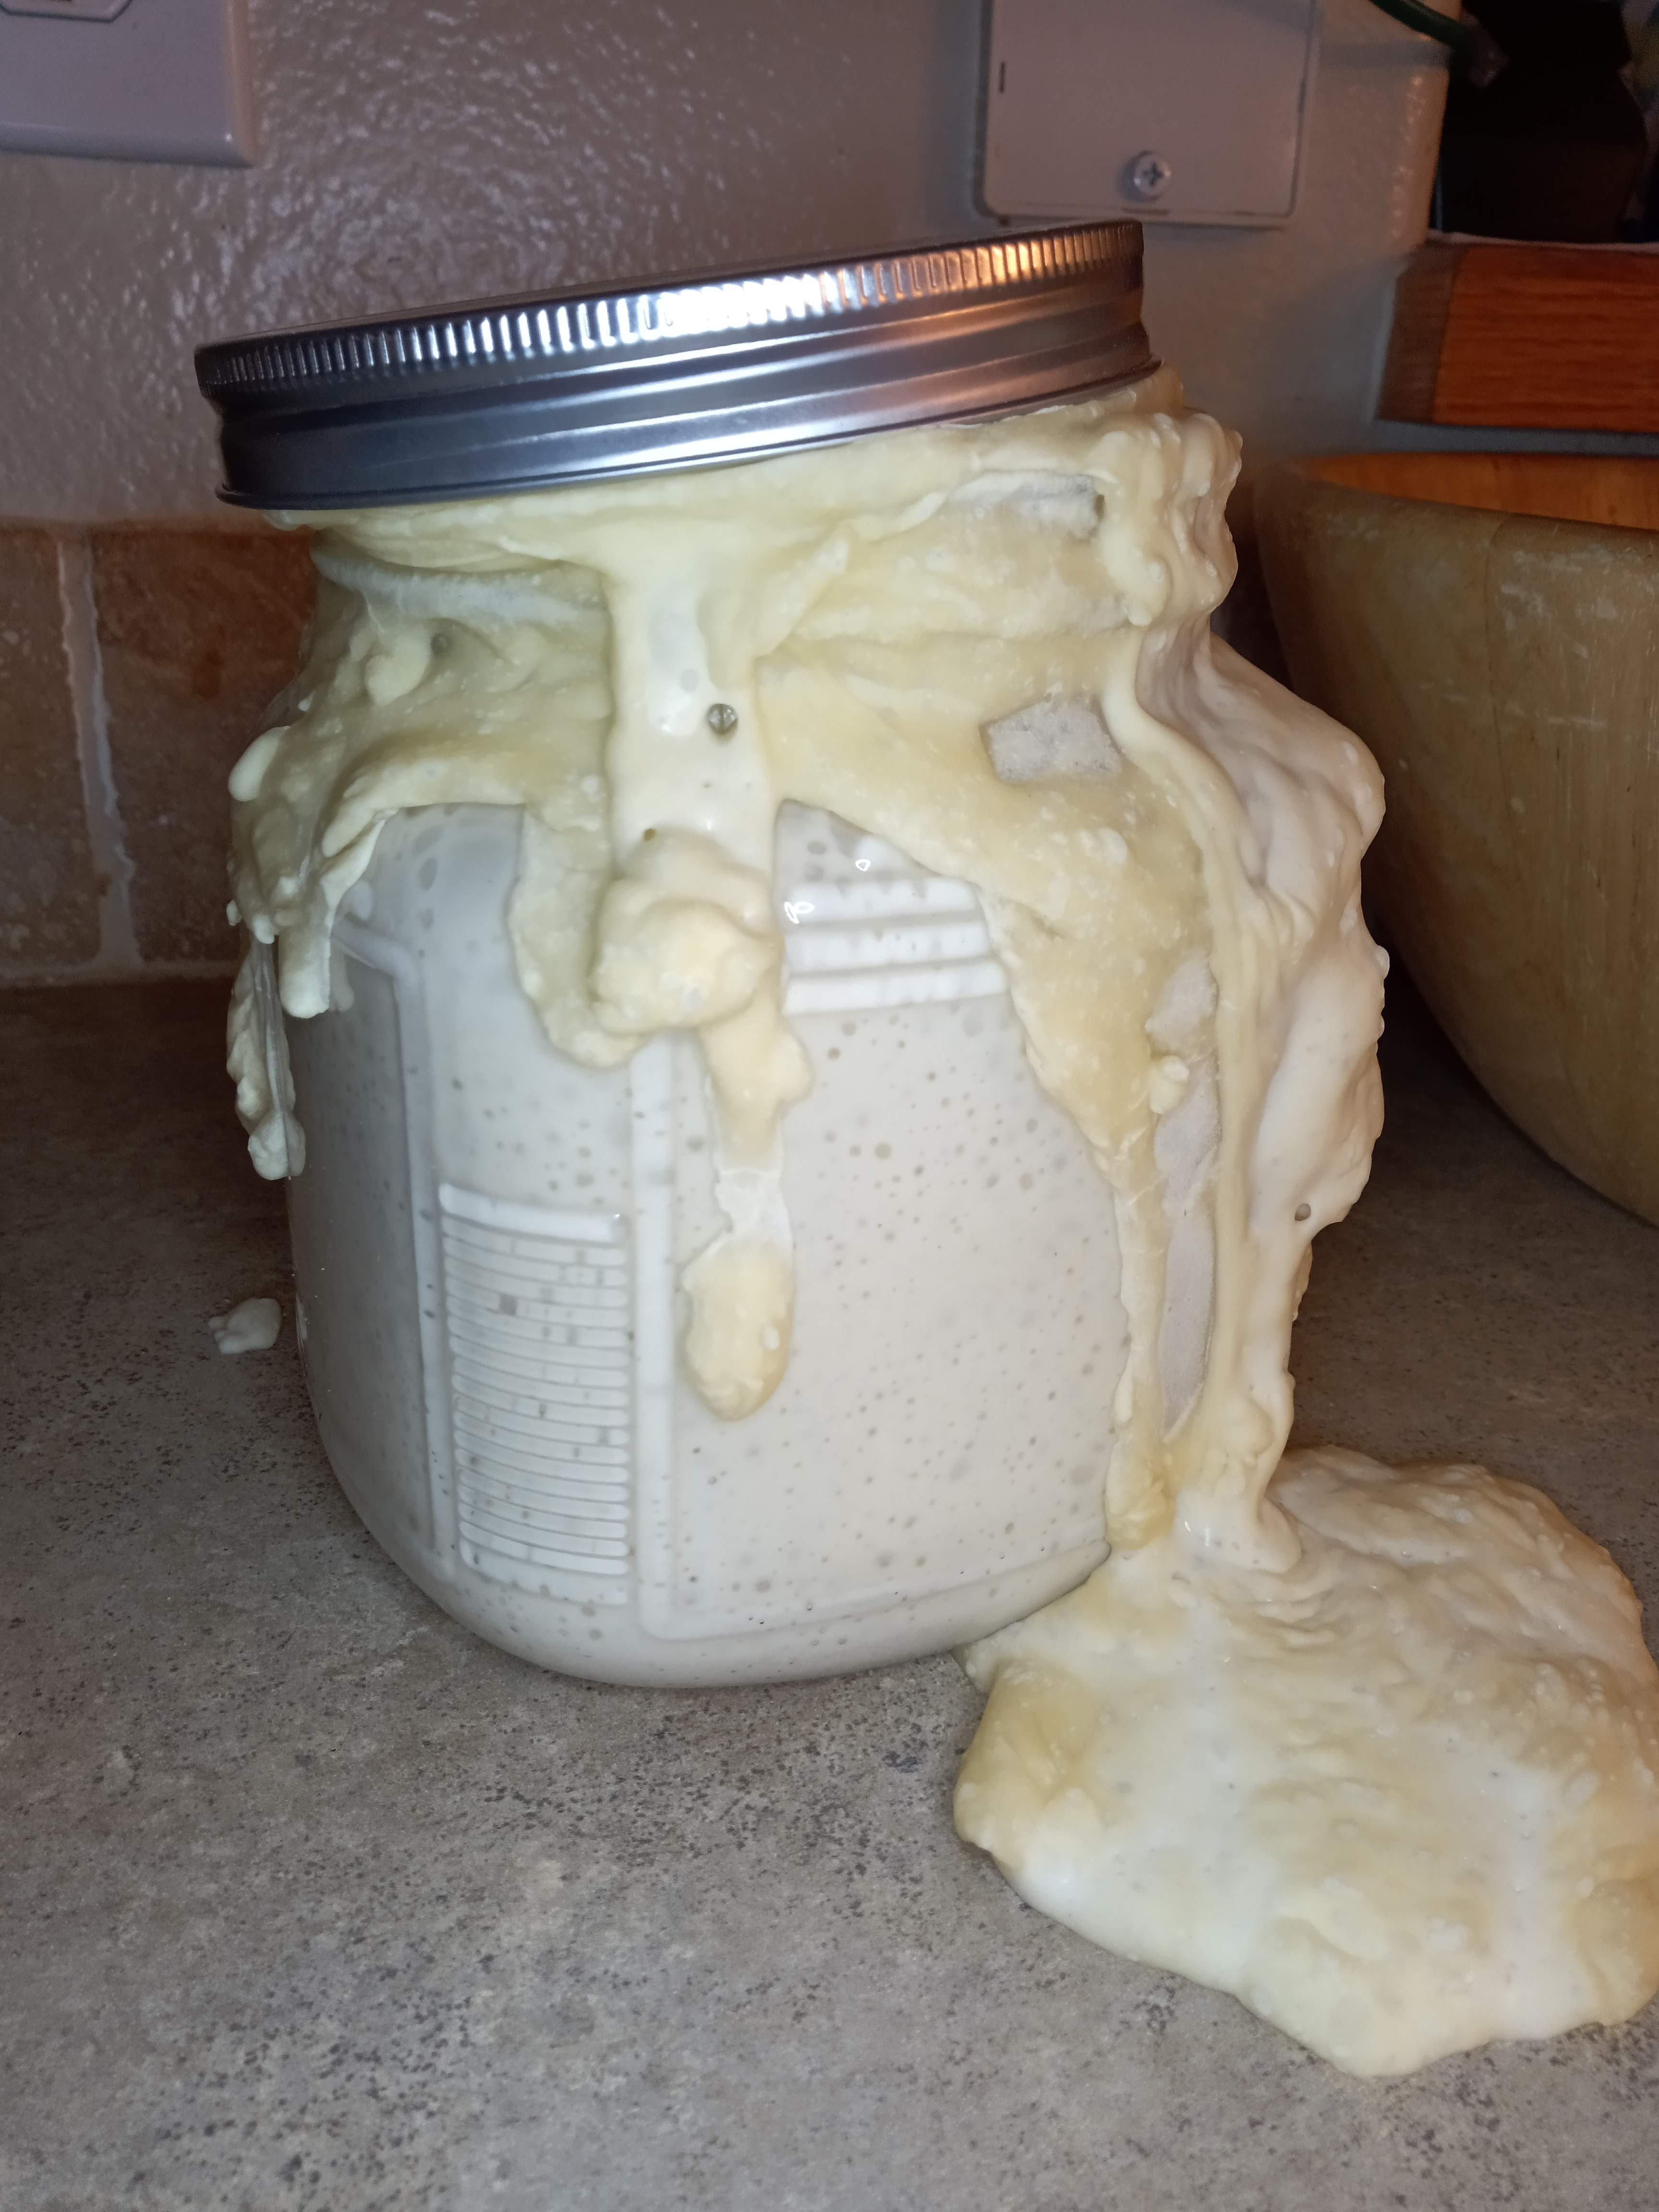 How to Deal with Sourdough Mess